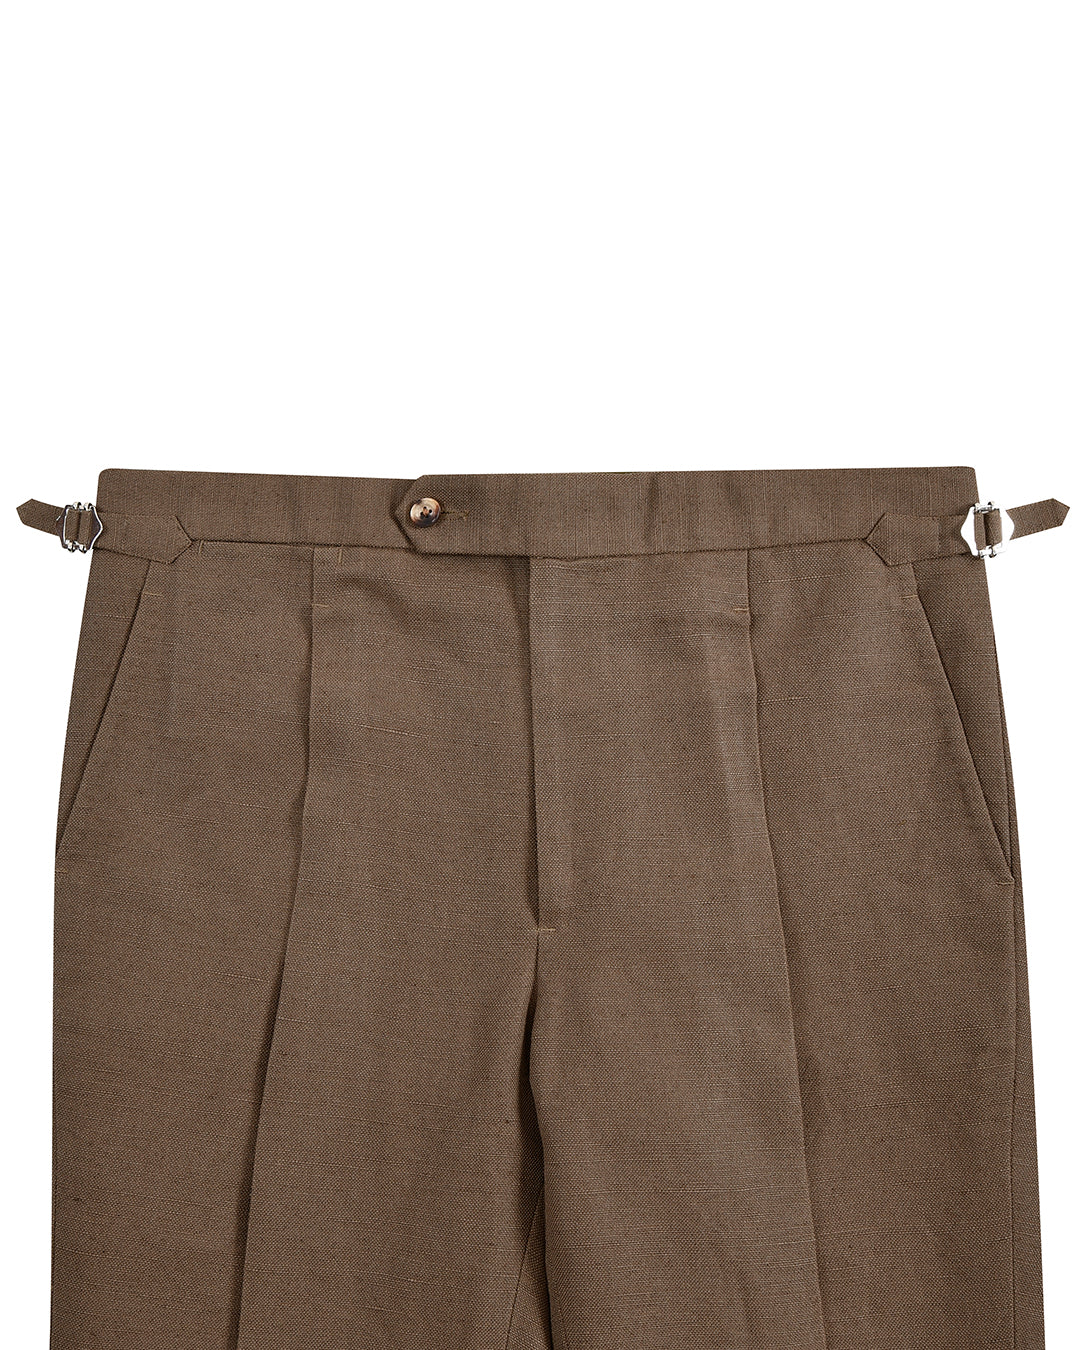 Front view of custom linen canvas pants for men by Luxire in brown